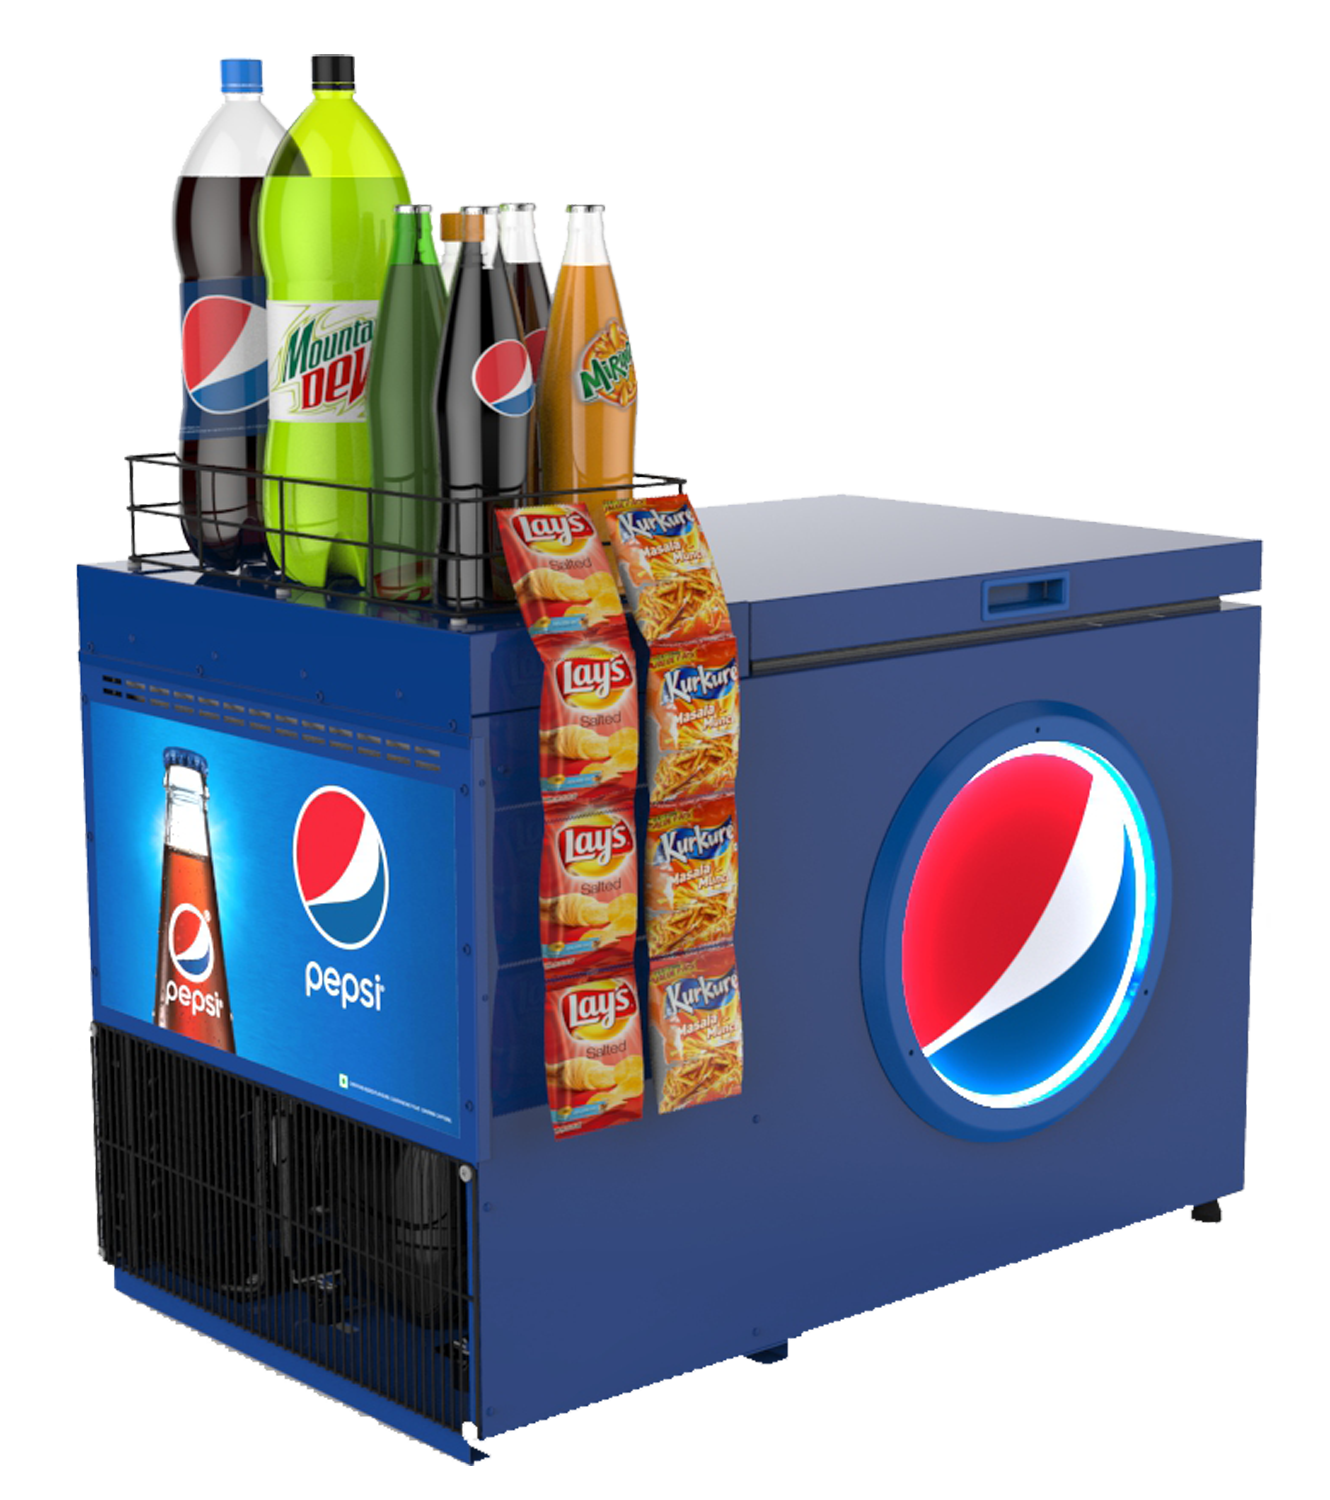 The Seaga Visi-Coolers is the ultimate solution in glass door refrigerated merchandising for worldwide brands including Pepsi, Coke, and 7Up